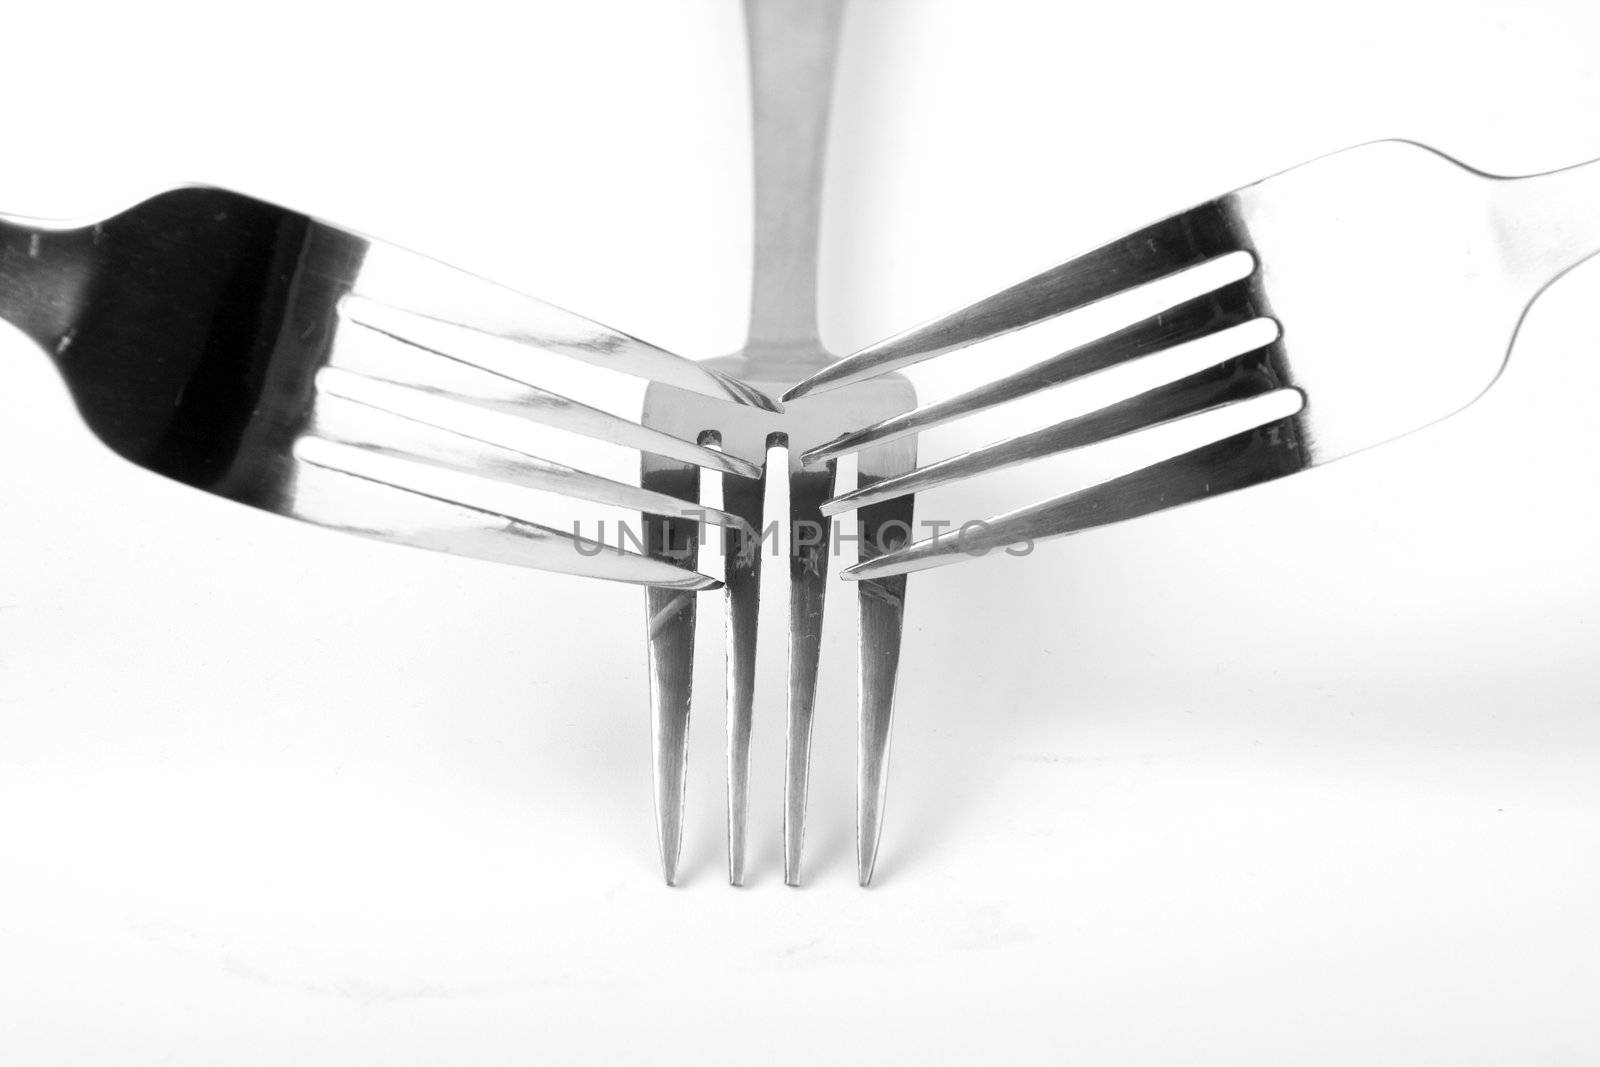 Shiny stainless steel forks on a white background